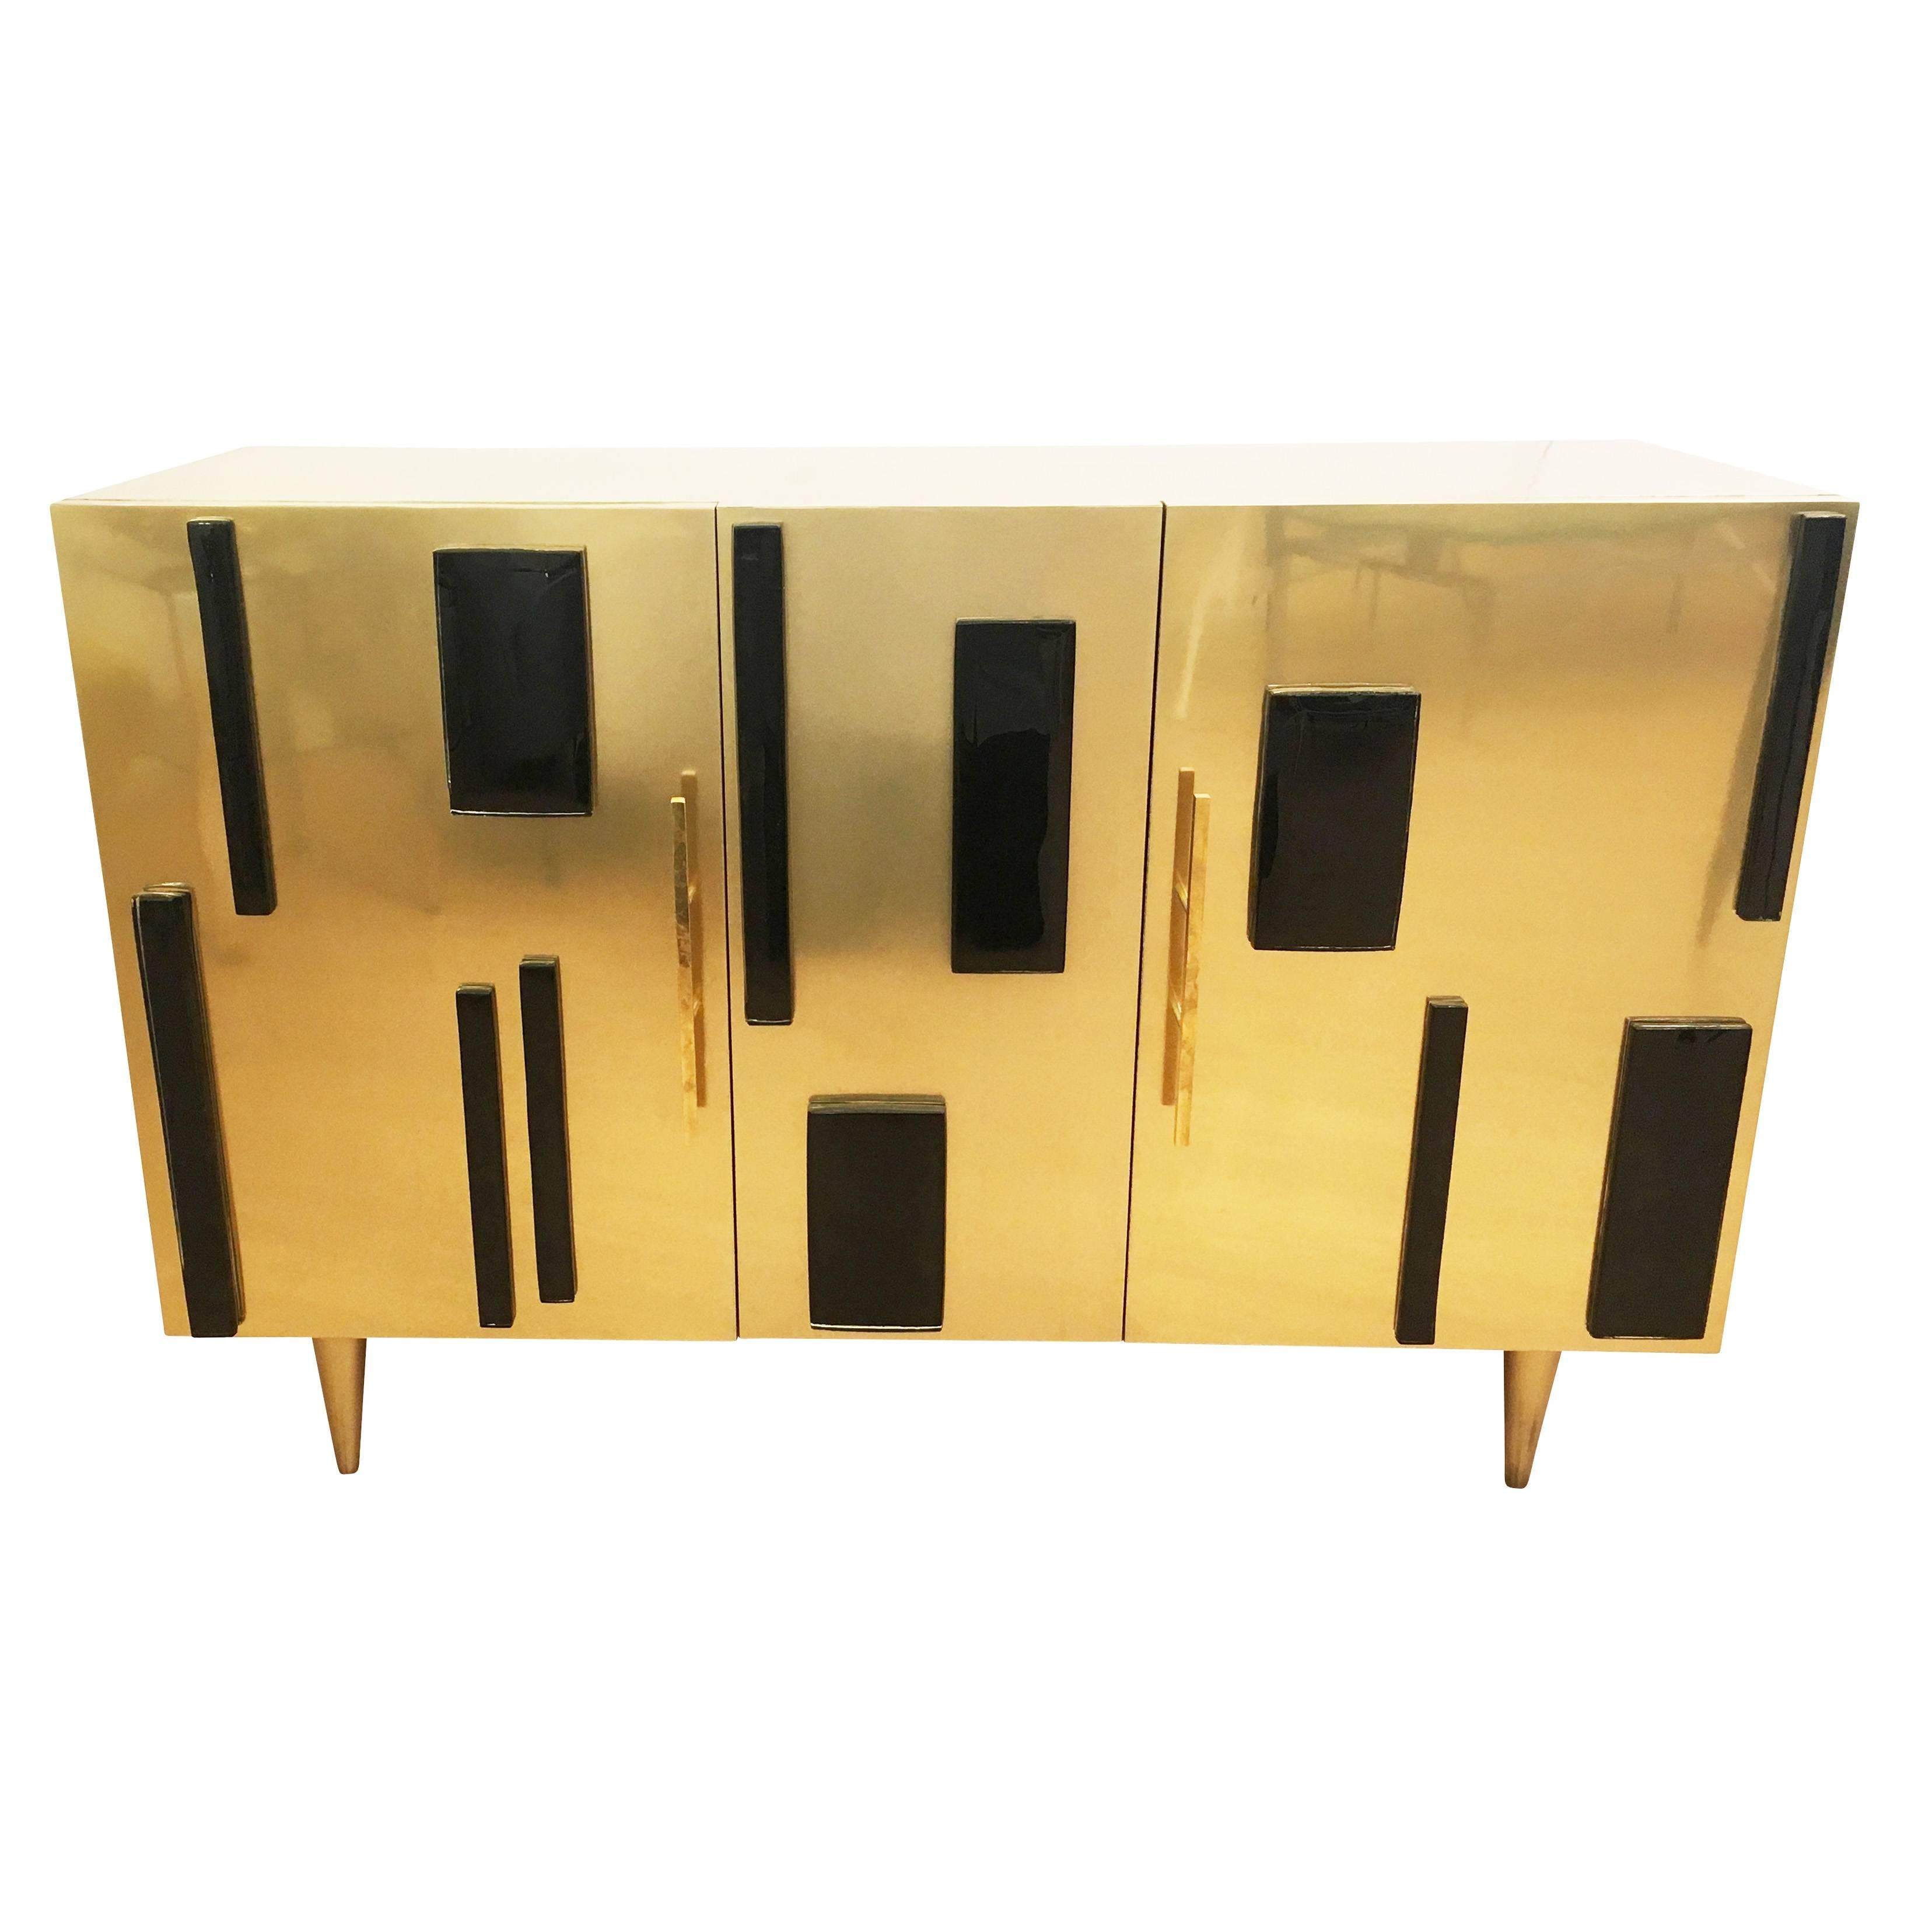 Limited edition credenza made by Italian artisan furniture maker, Interno 43 exclusively for Gaspare Asaro’s, studio line, formA. Paneled in brass and decorated with black glass. Can be custom made in different sizes.

Measure: Width 48”

Height